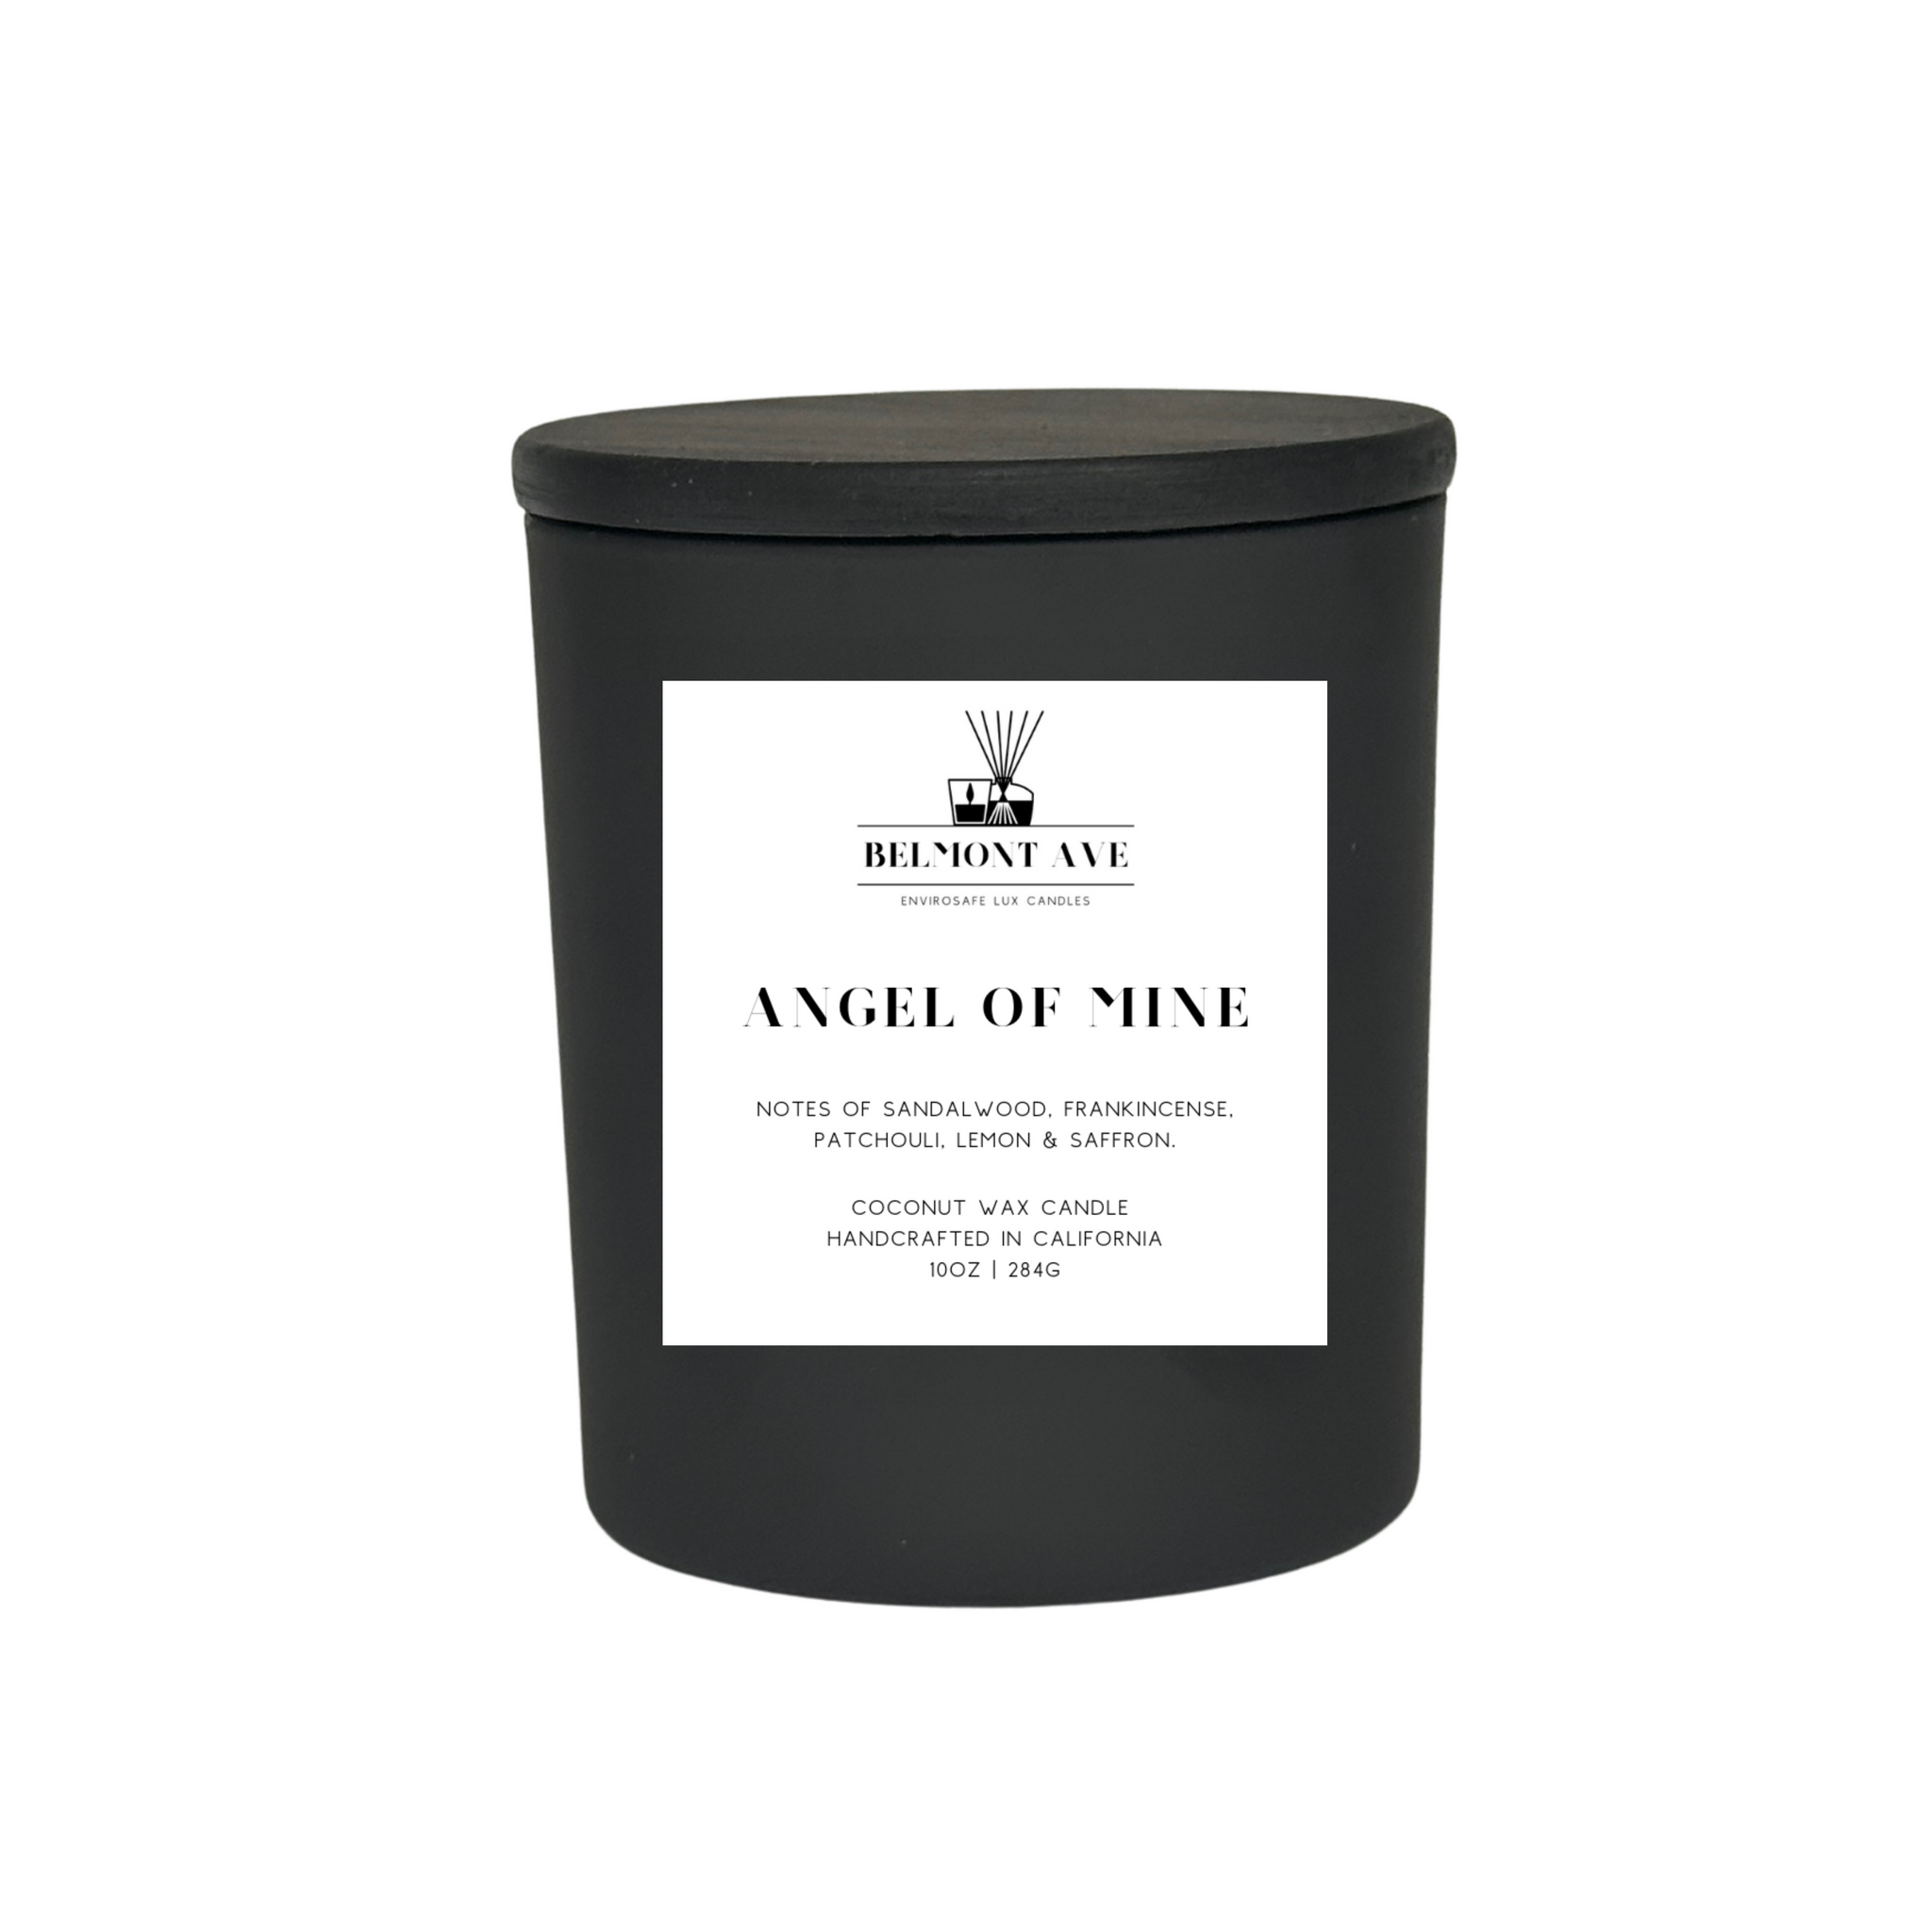 10oz Angel of Mine Scented Coconut Wax Candle